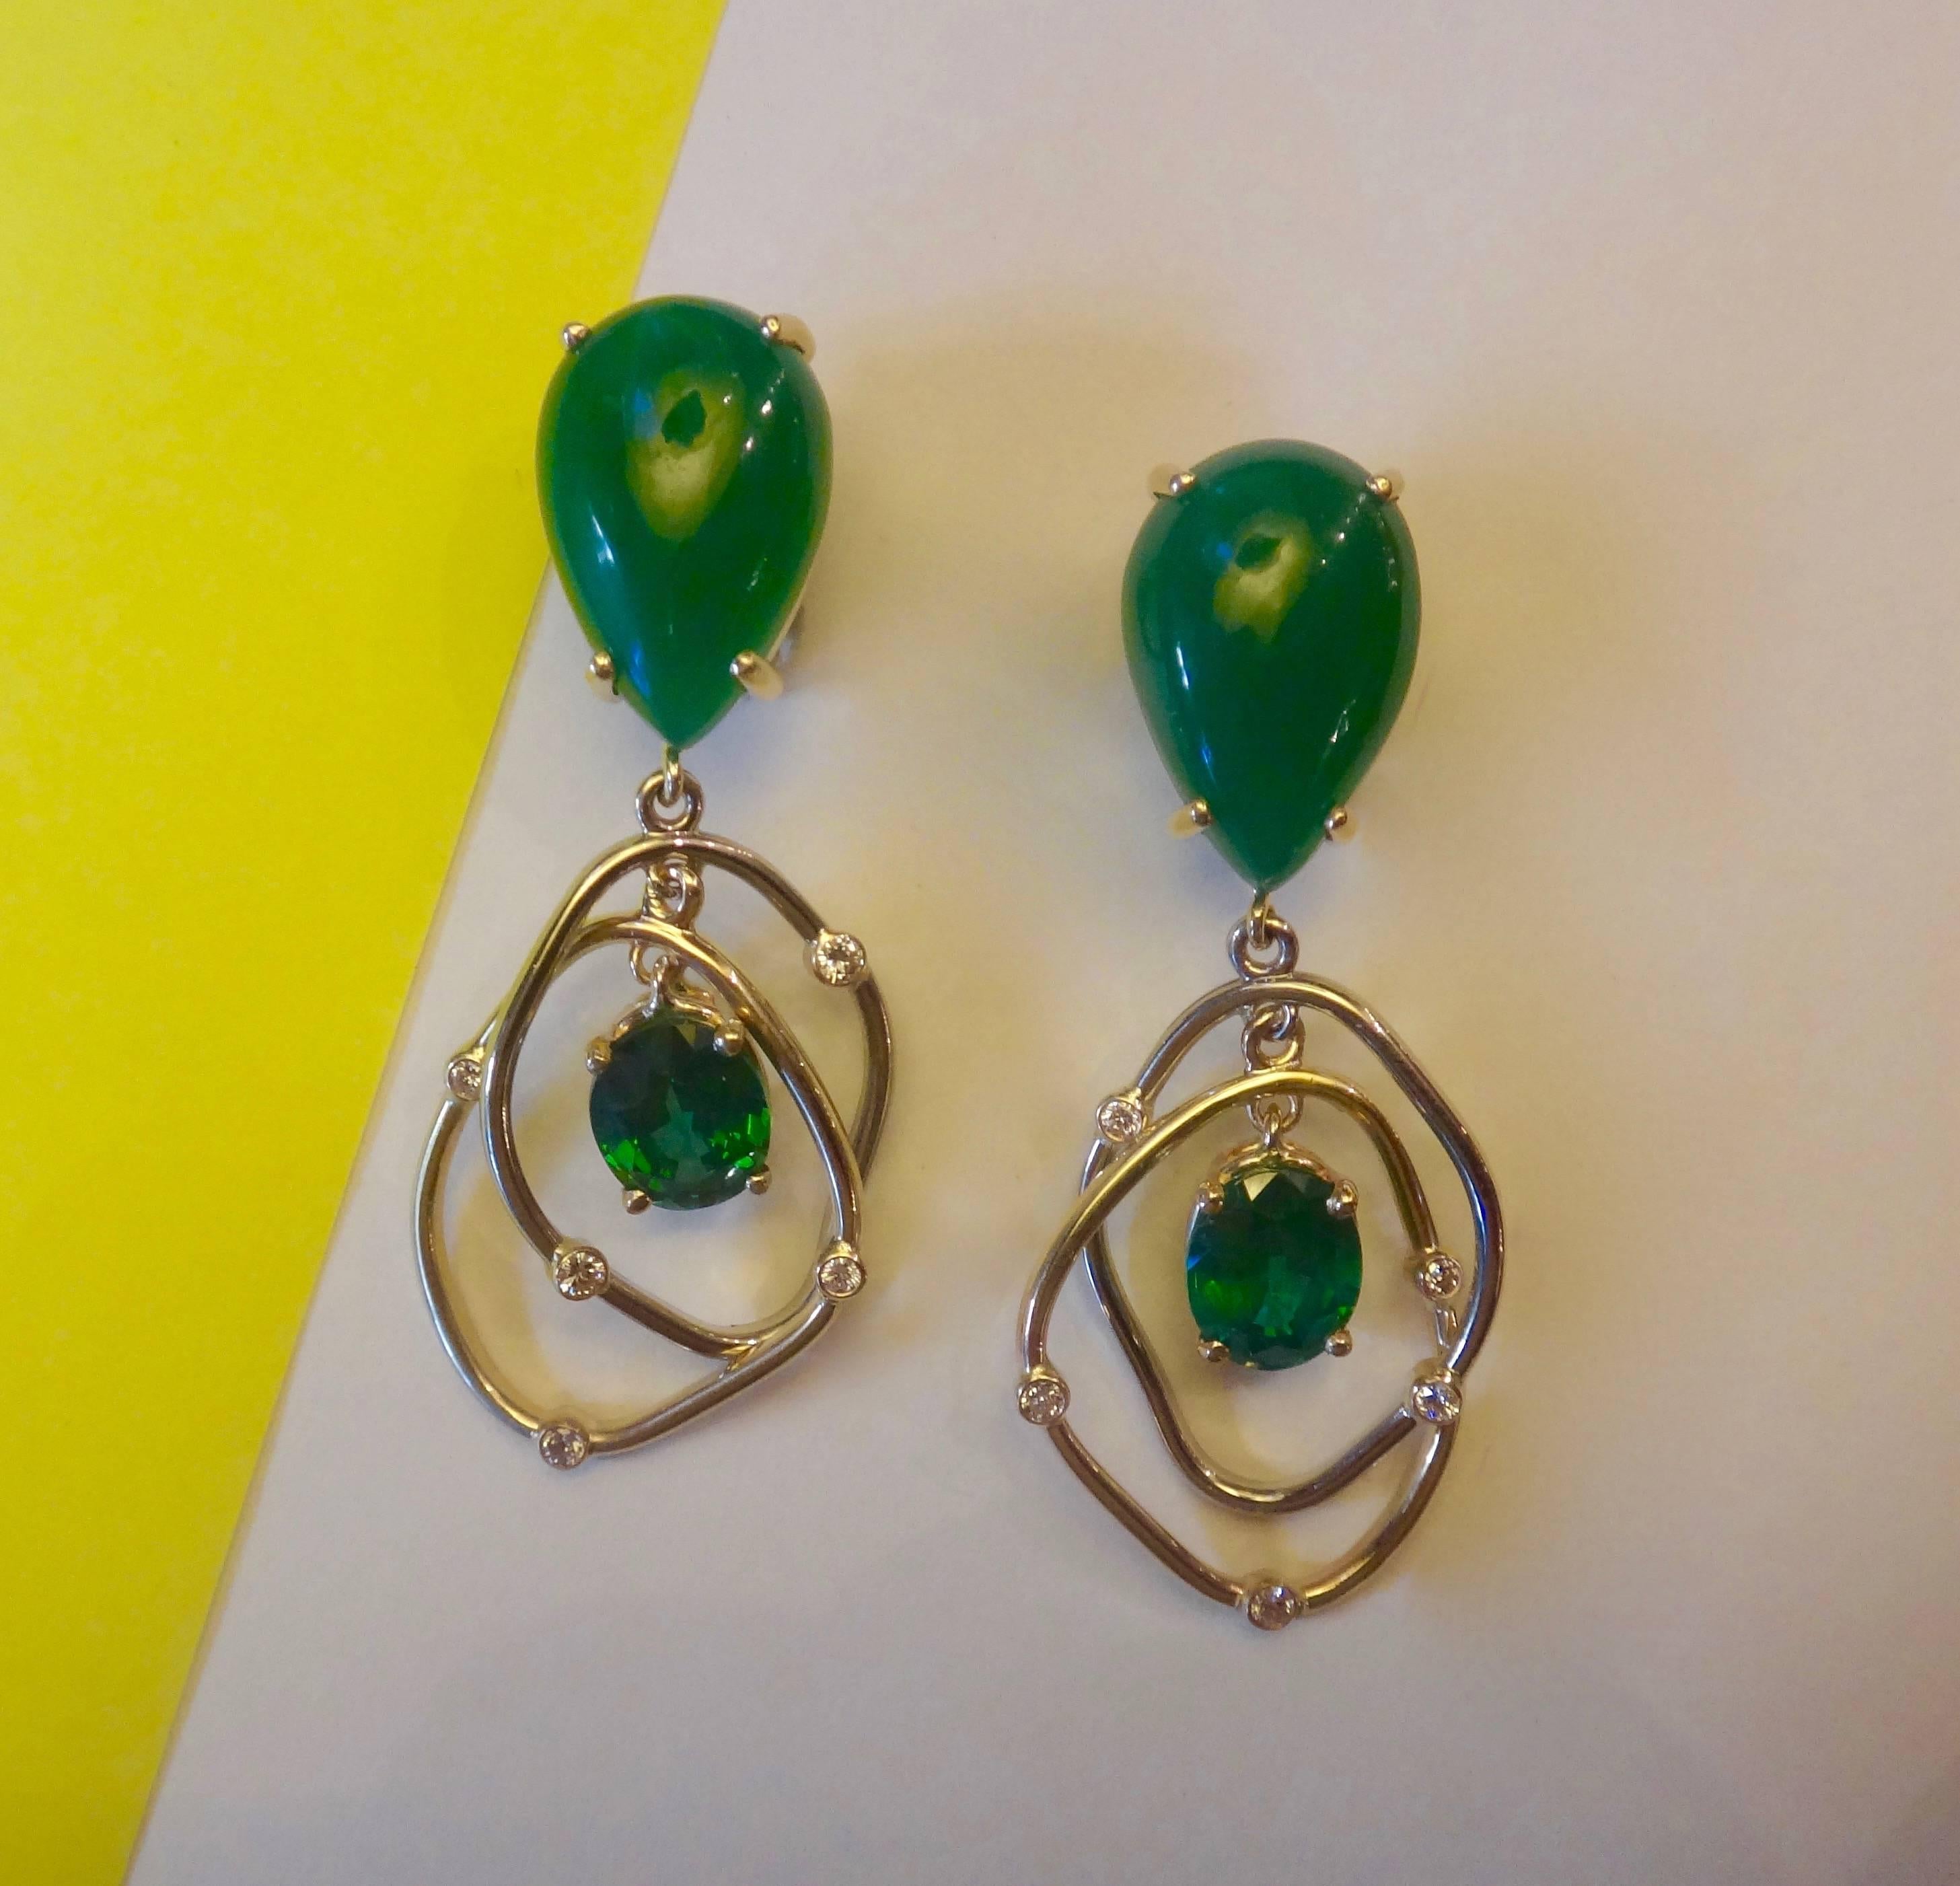 Pear shaped and cabochon cut Botswana agates form the tops of these kinetic earrings.  Dangling below are free form hoops of white and yellow gold interspersed with bezel set diamonds and framing a pair of oval cut green topaz.  The one-of-a-kind